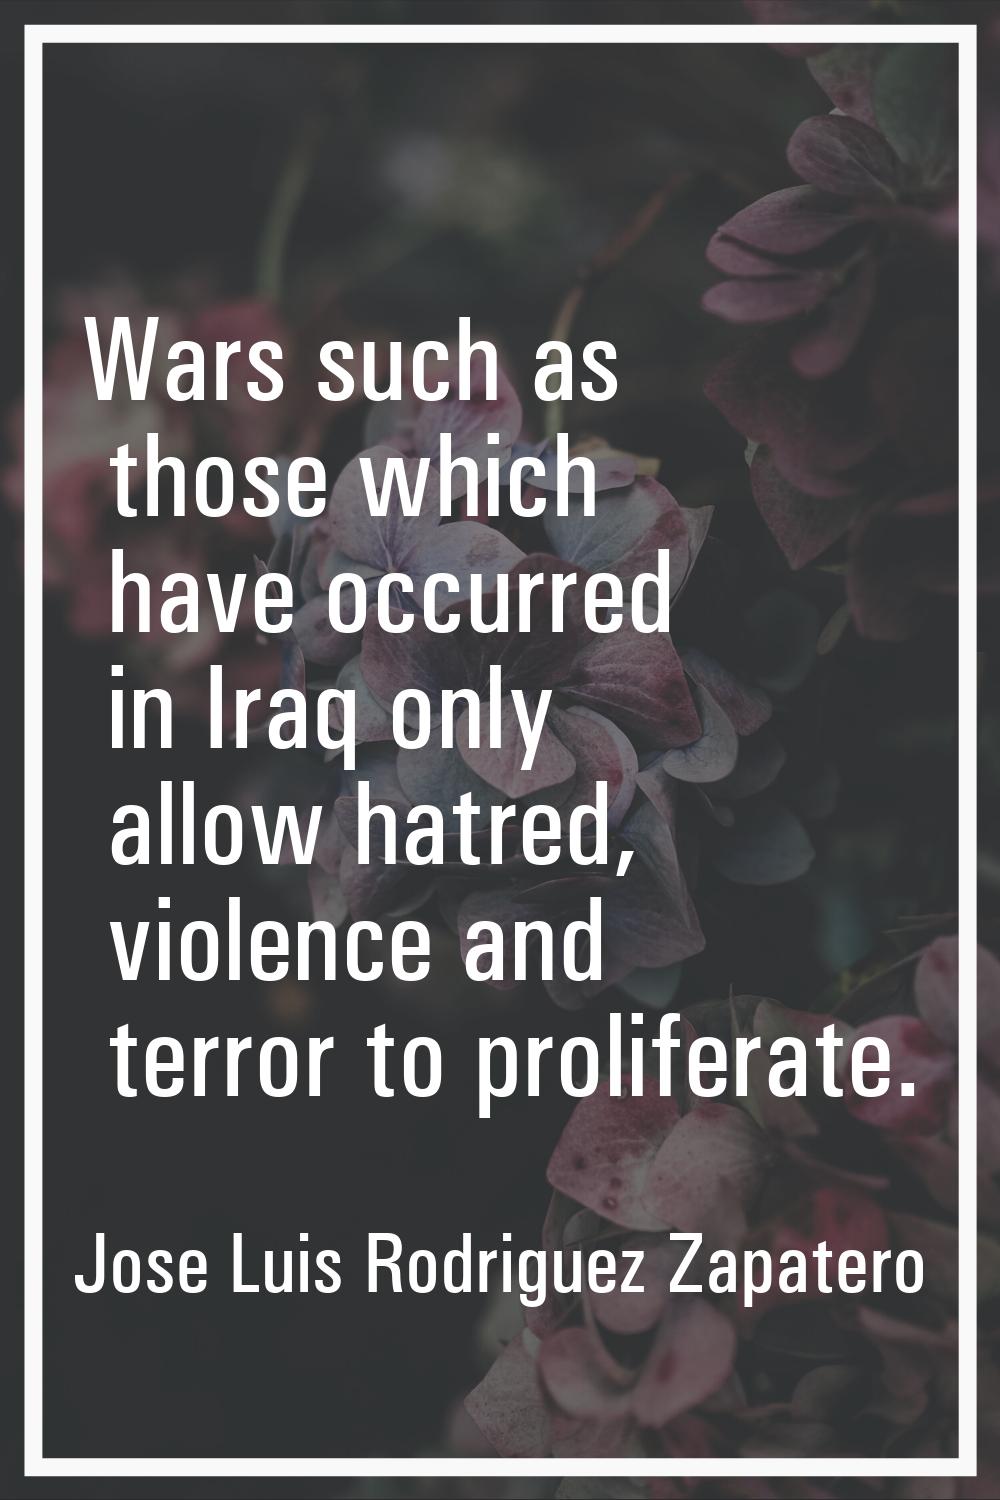 Wars such as those which have occurred in Iraq only allow hatred, violence and terror to proliferat